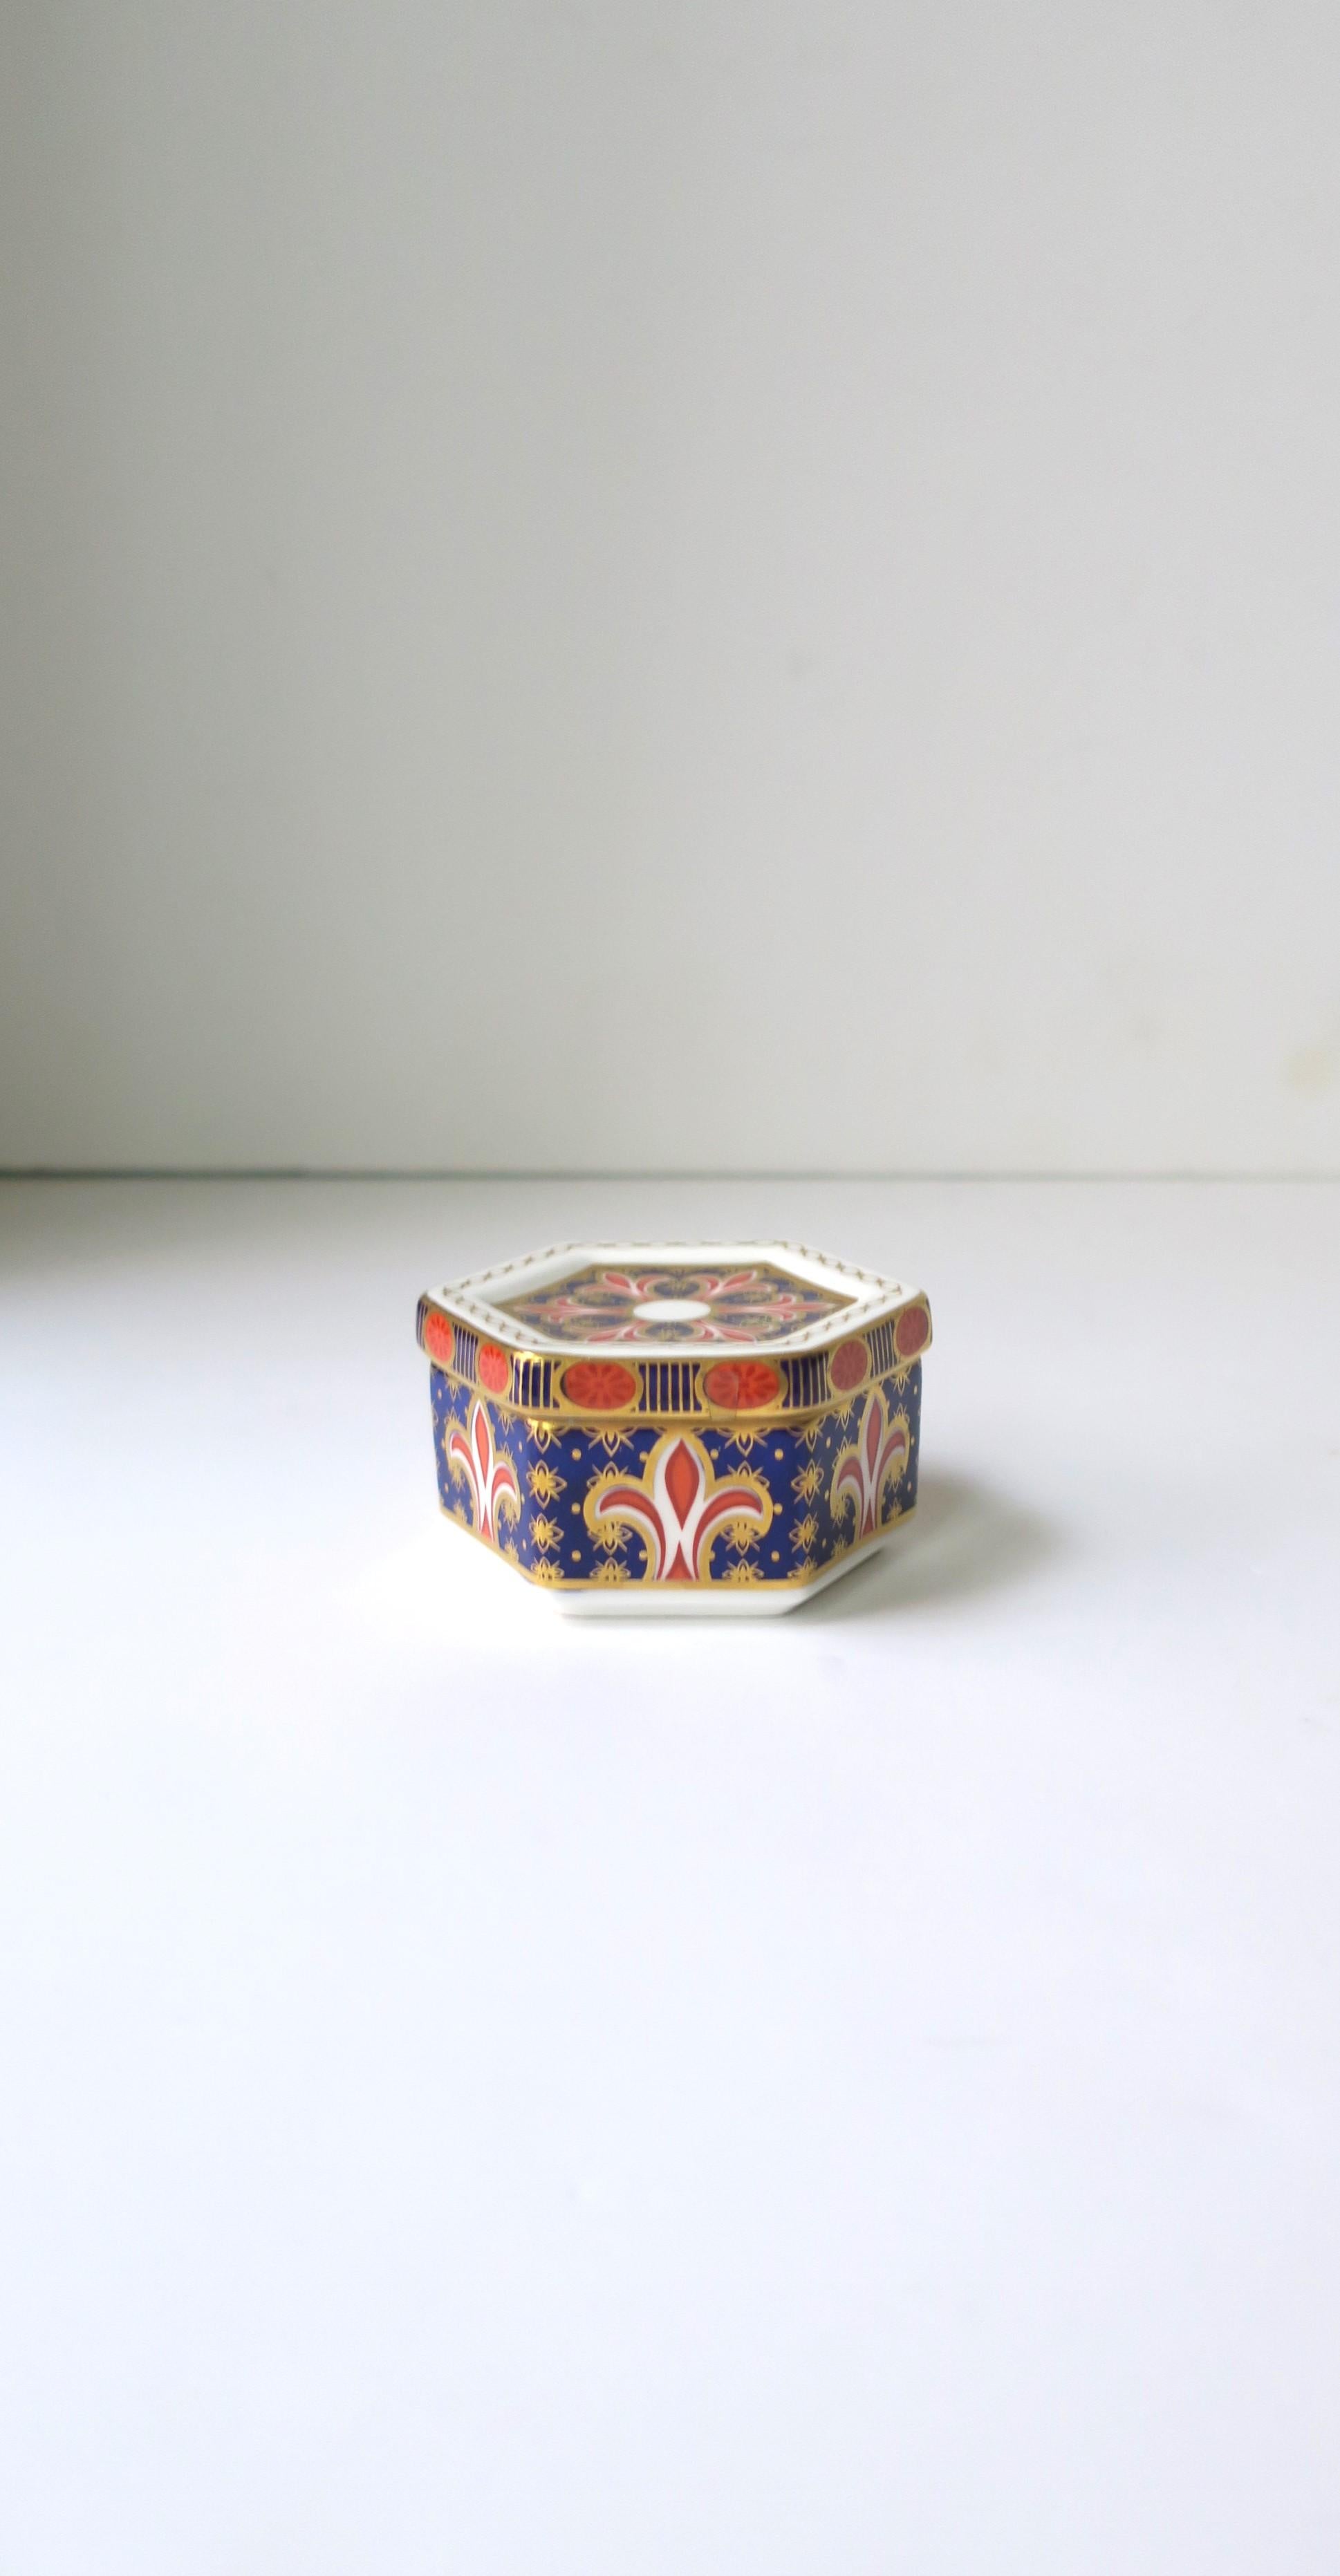 A beautiful authentic English fine bone chine porcelain box in the 'Old Imari' pattern, by Royal Crown Derby, circa late-20th century, England. Piece is hand-painted in 22kt gold. Box has a 'hexagon' shape which is a nice alternative to round. A